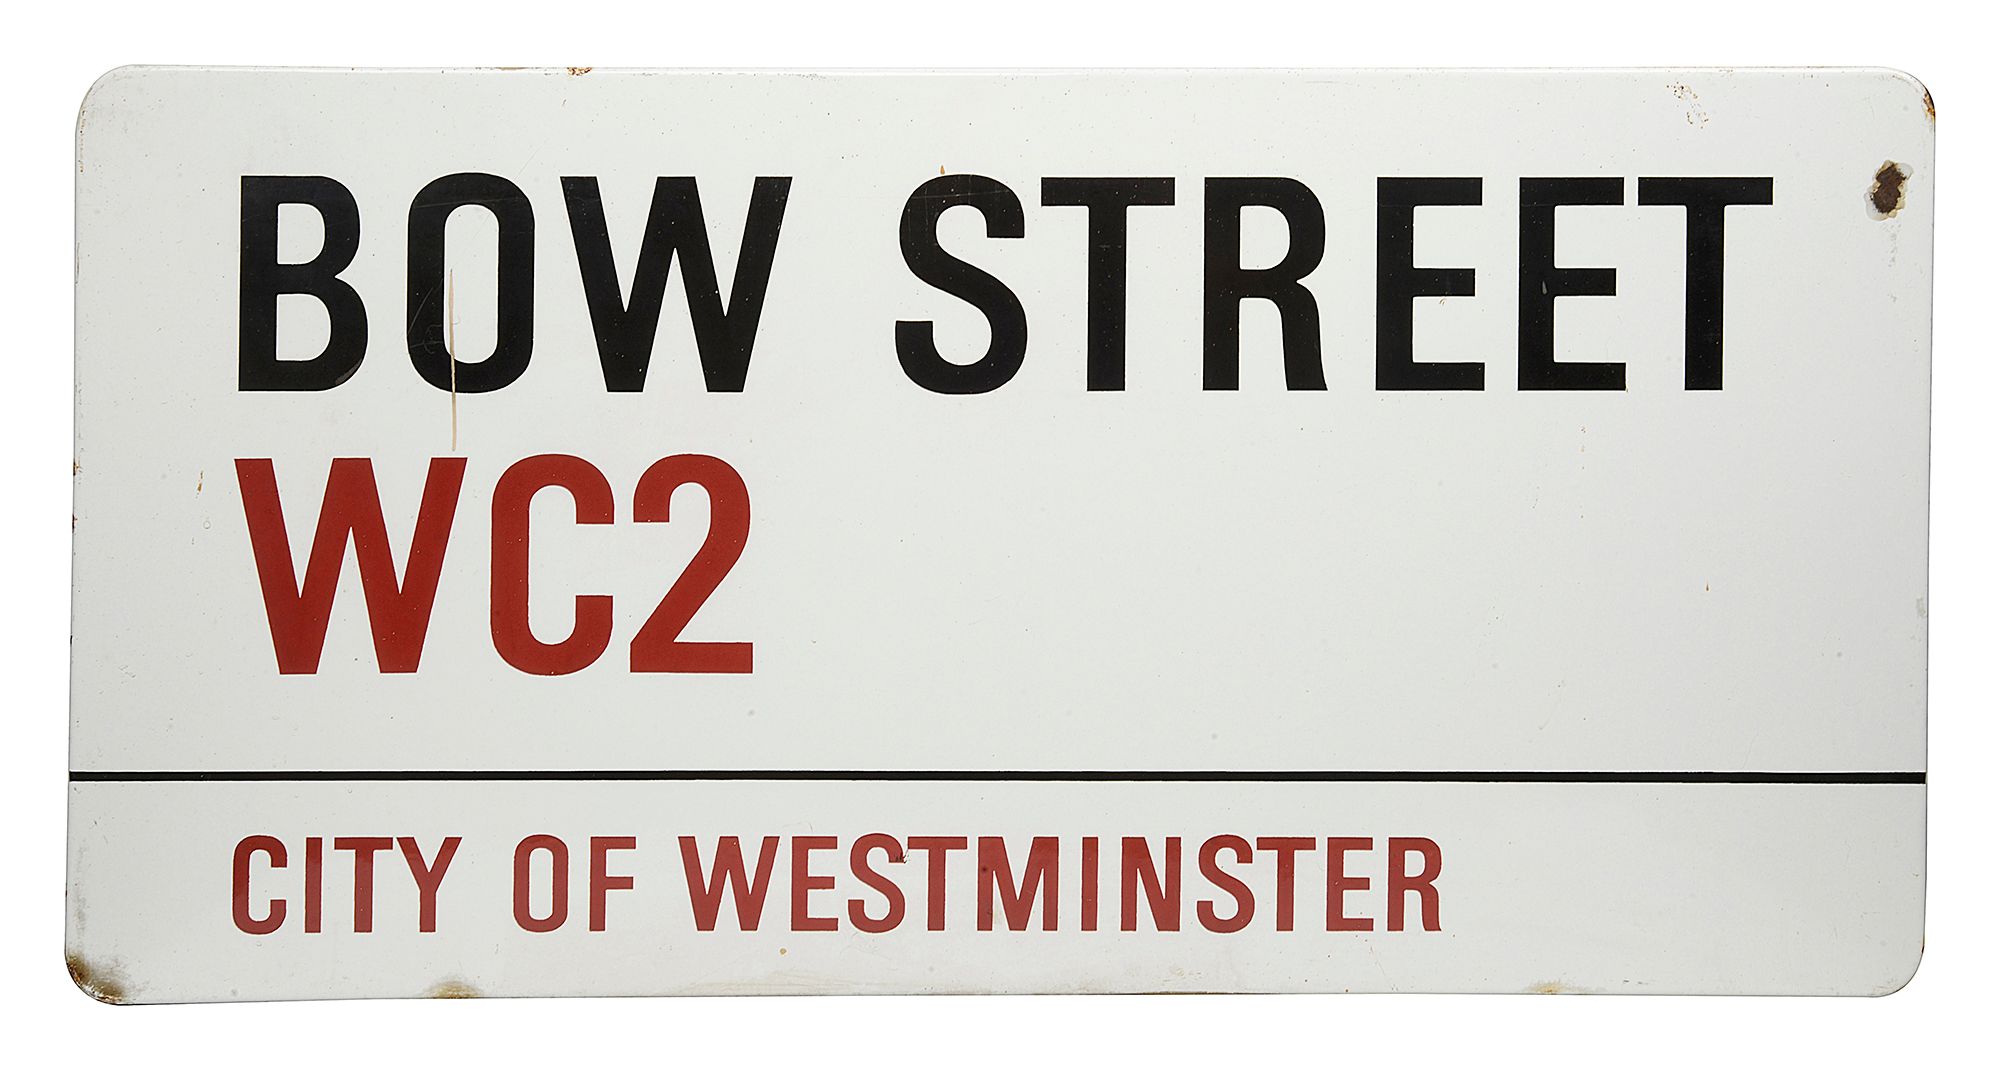 An enamelled and iron street sign for Bow Street WC2 City of Westminster